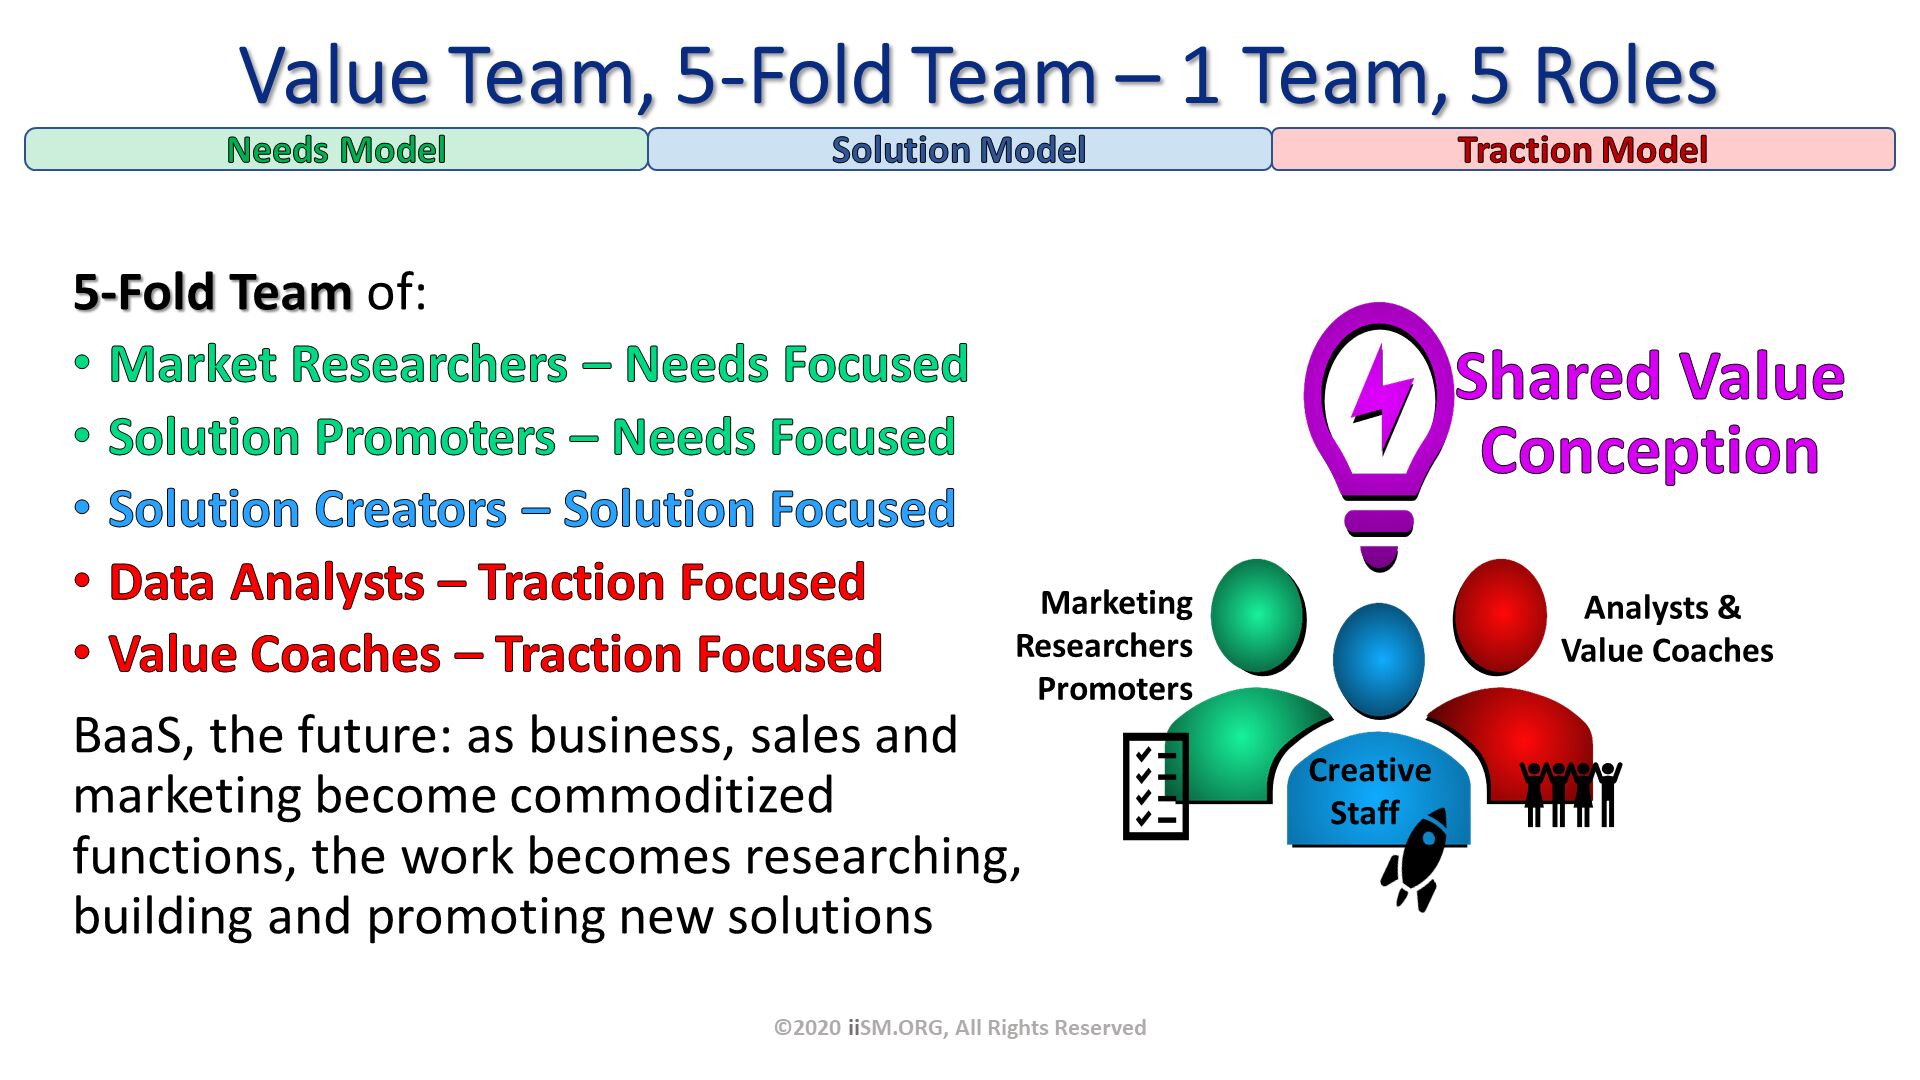 Value Team, 5-Fold Team – 1 Team, 5 Roles. 5-Fold Team of:
Market Researchers – Needs Focused
Solution Promoters – Needs Focused
Solution Creators – Solution Focused
Data Analysts – Traction Focused
Value Coaches – Traction Focused
BaaS, the future: as business, sales and marketing become commoditized functions, the work becomes researching, building and promoting new solutions
. ©2020 iiSM.ORG, All Rights Reserved. Analysts & Value Coaches. MarketingResearchers
Promoters. CreativeStaff . 